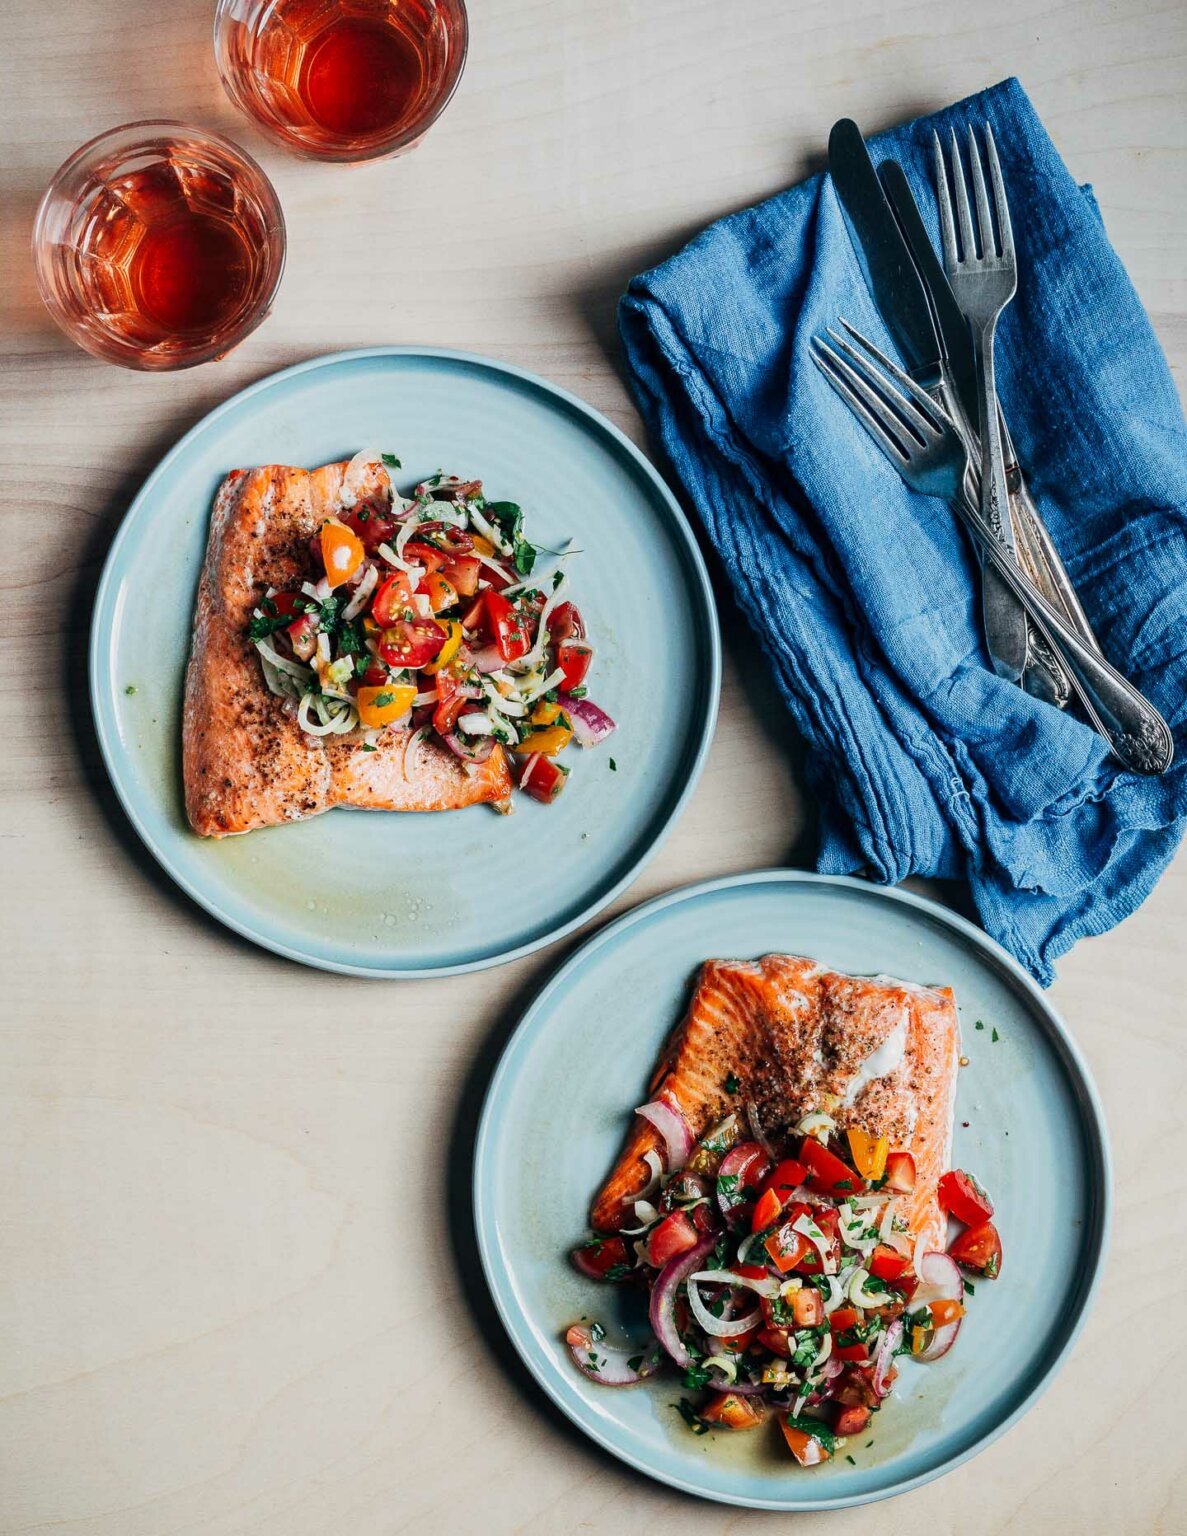 Broiled Salmon with Tomato, Fennel, and Herb Salad